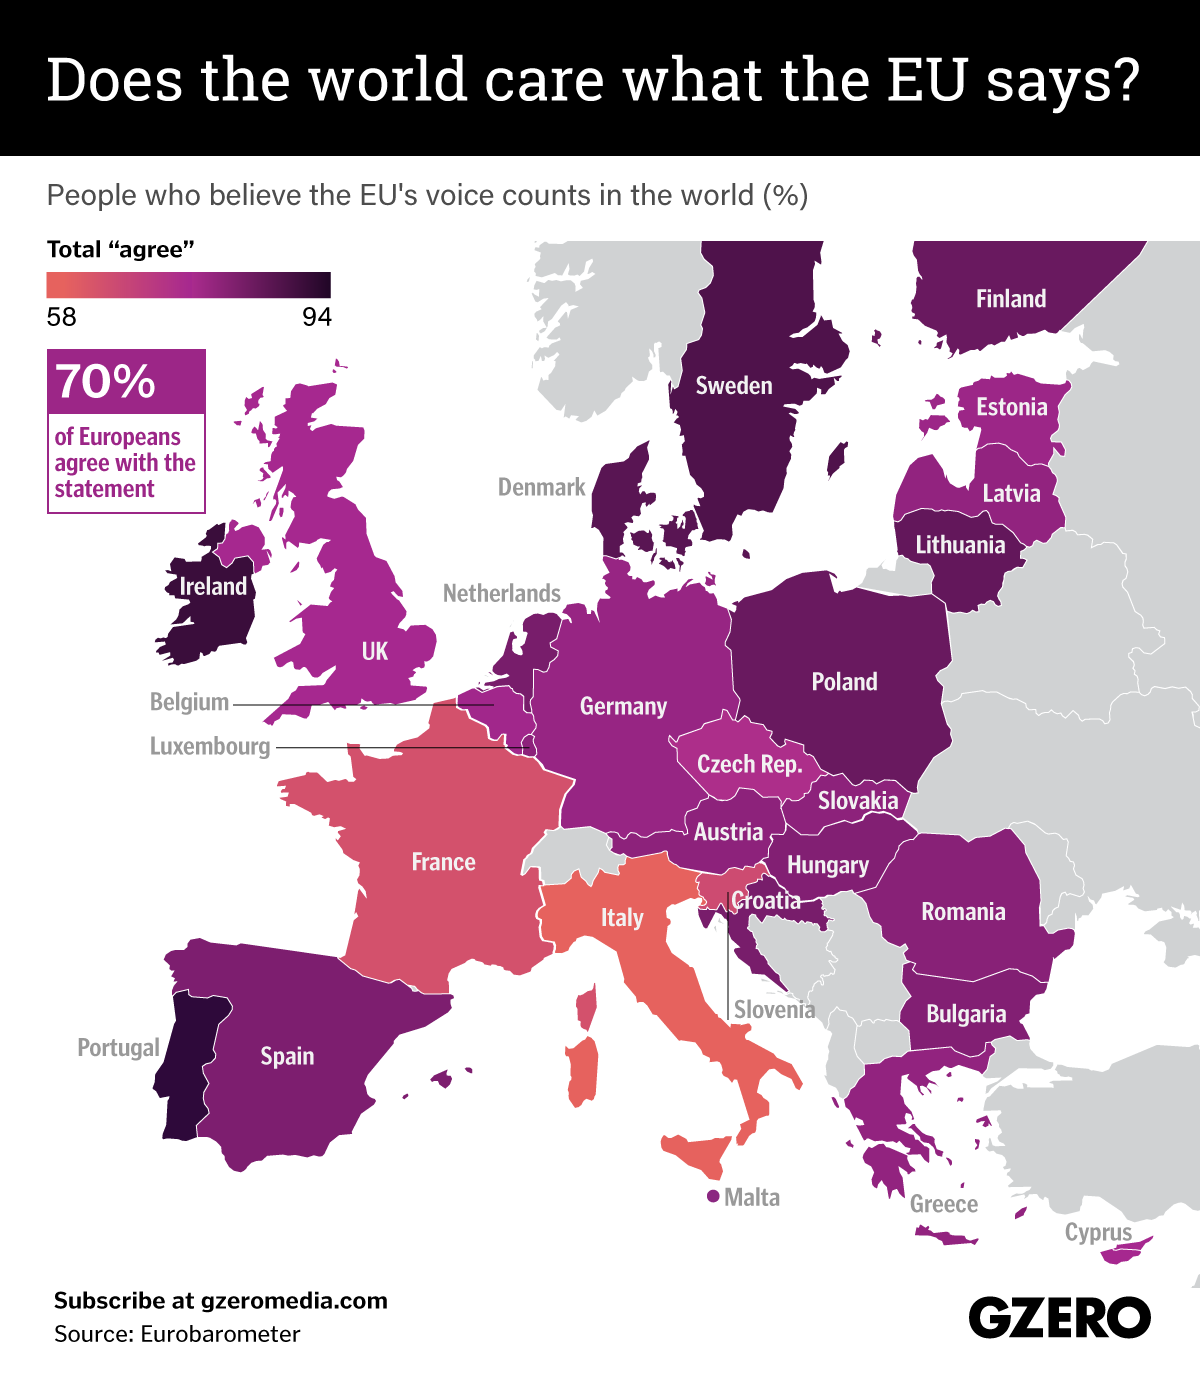 The Graphic Truth: Does the world care what the EU says?